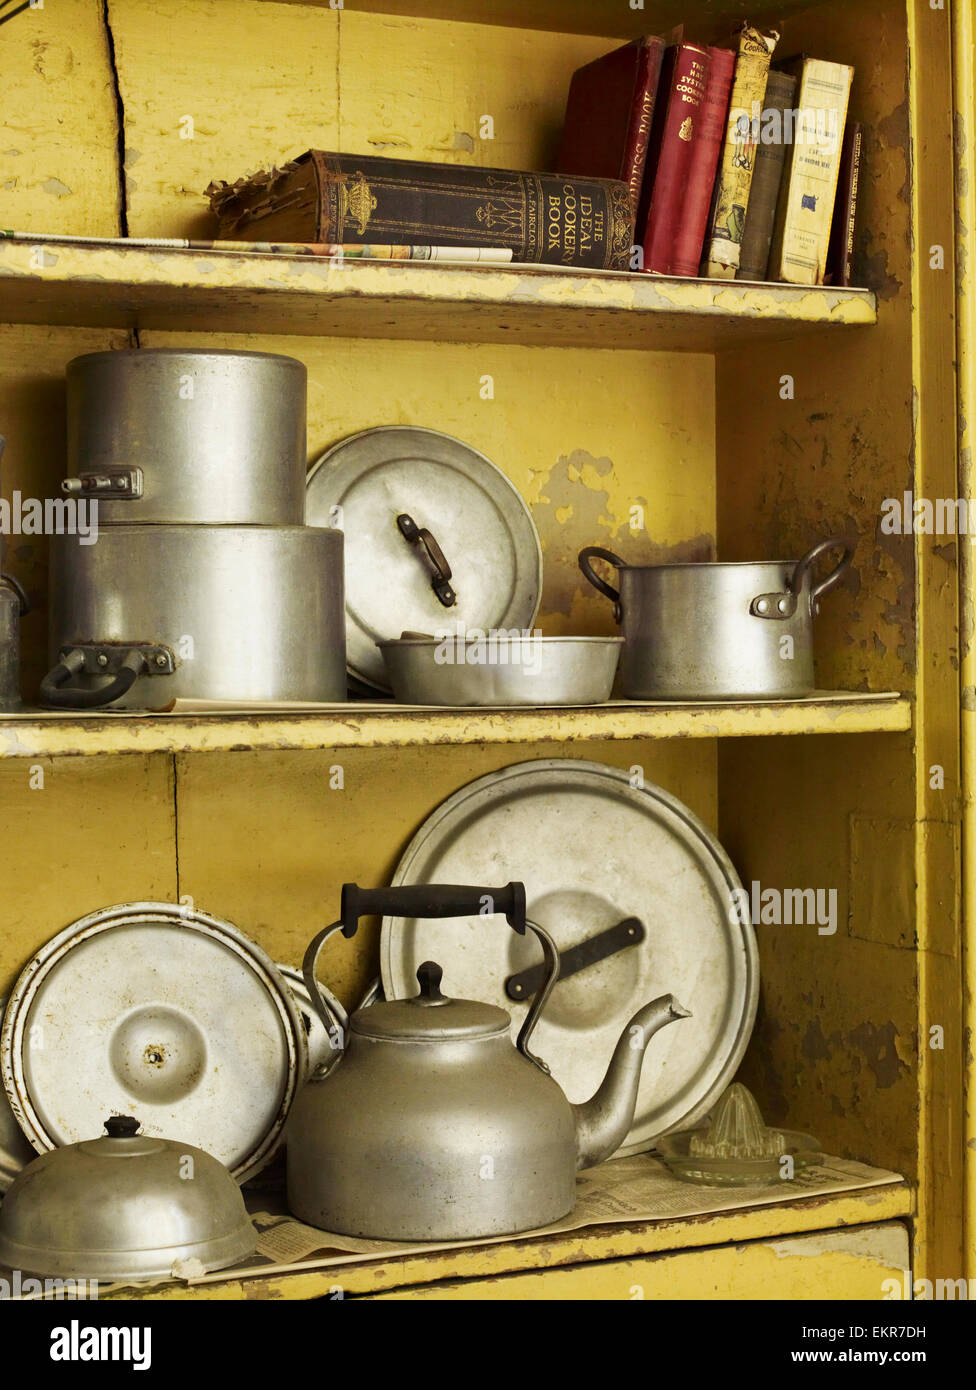 Old well worn recipe books and pots and pans on a kitchen shelf. Stock Photo